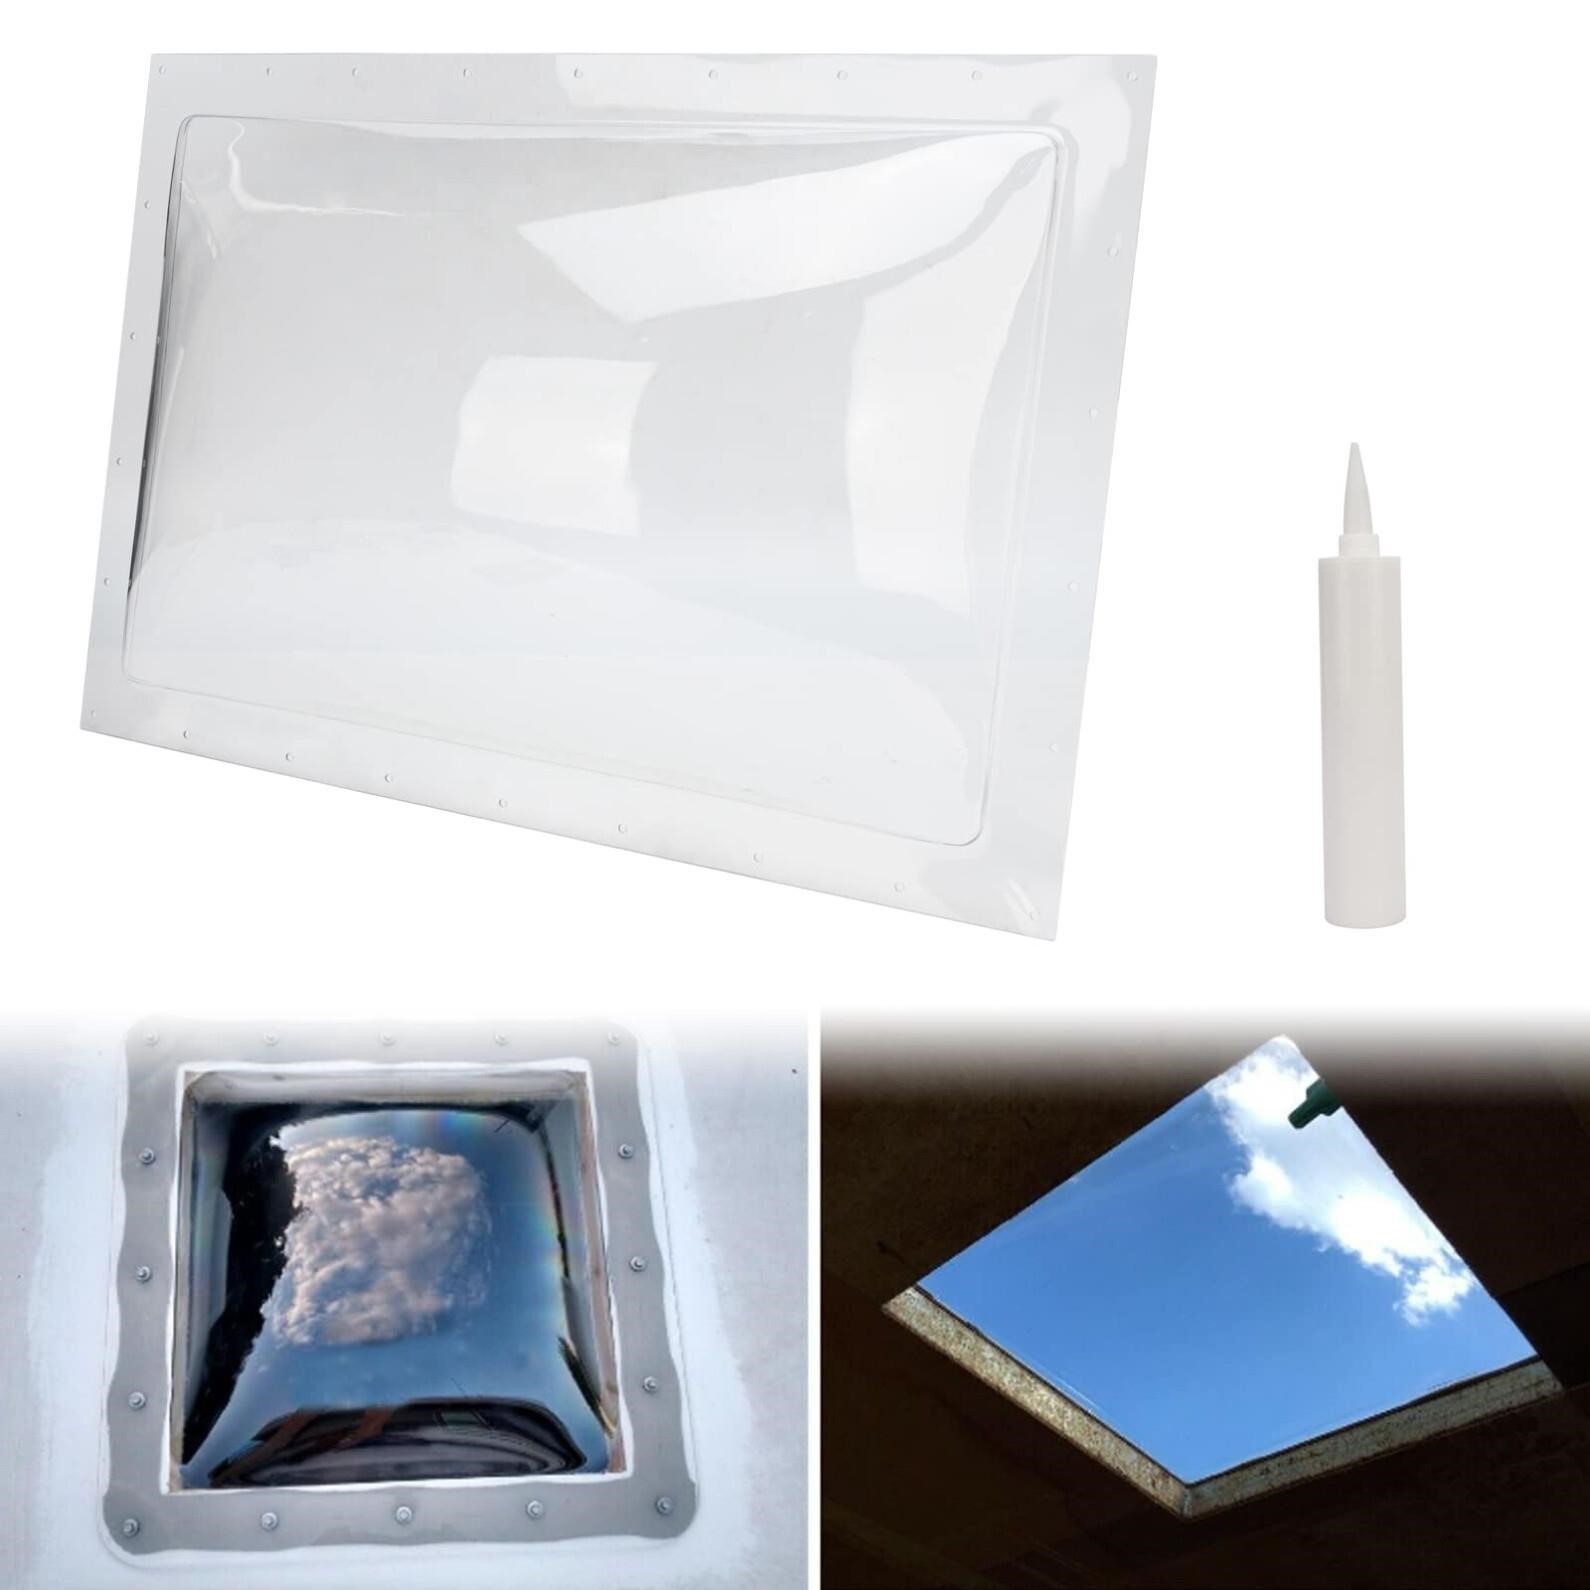 GEATaaT RV Skylight Outer Dome,18"x26" OD Universa